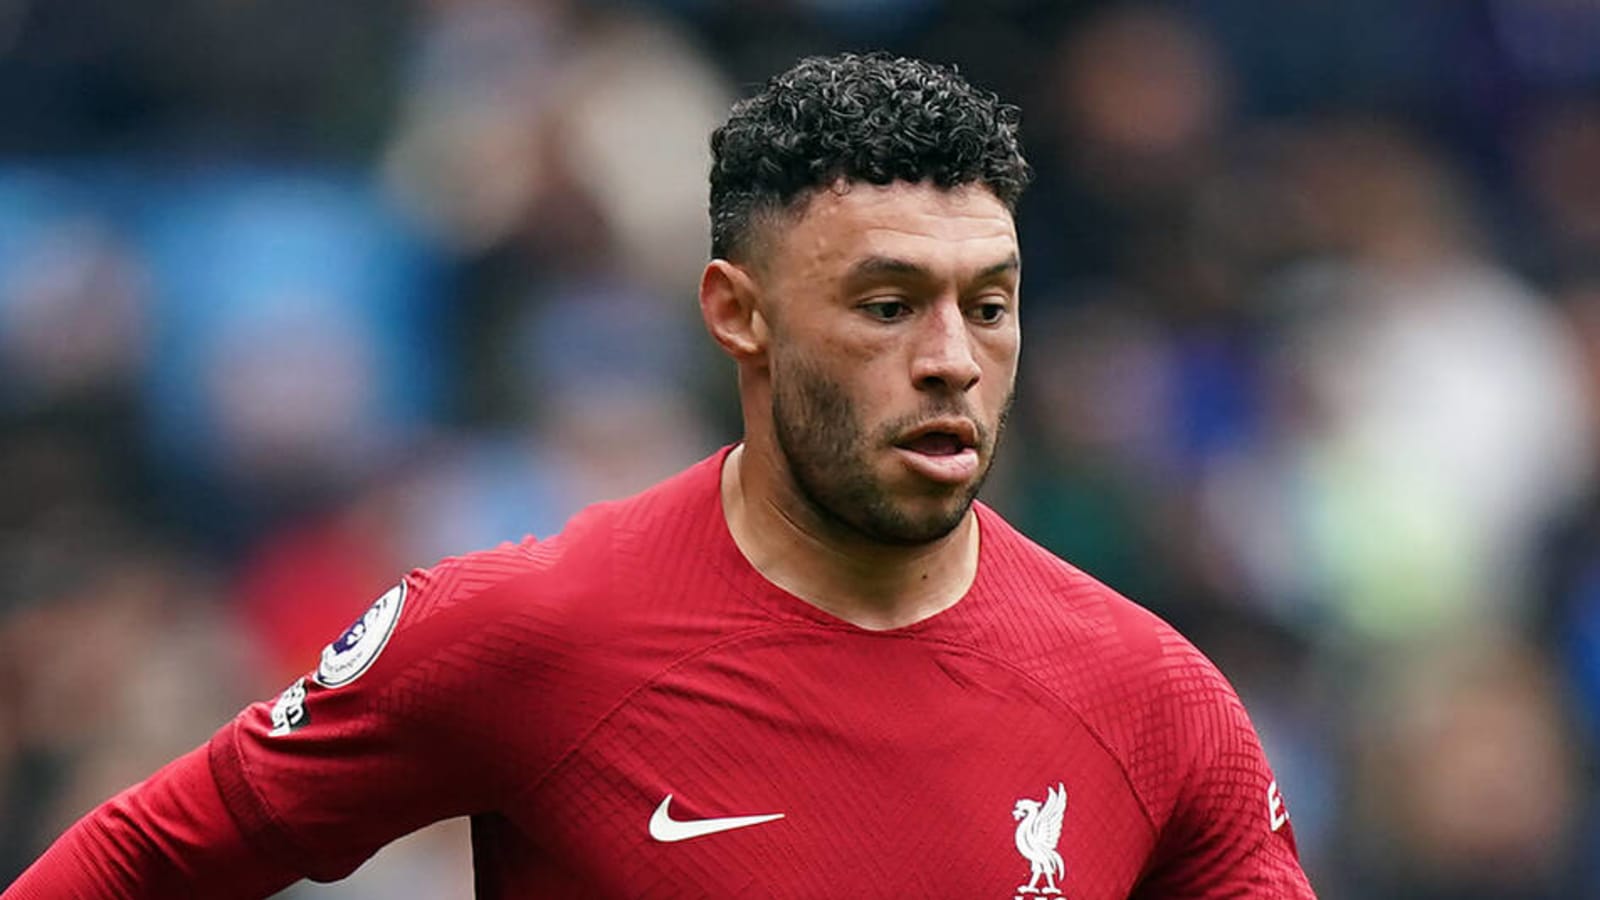 Alex Oxlade-Chamberlain makes startling claim about how he learned his time at Liverpool was over